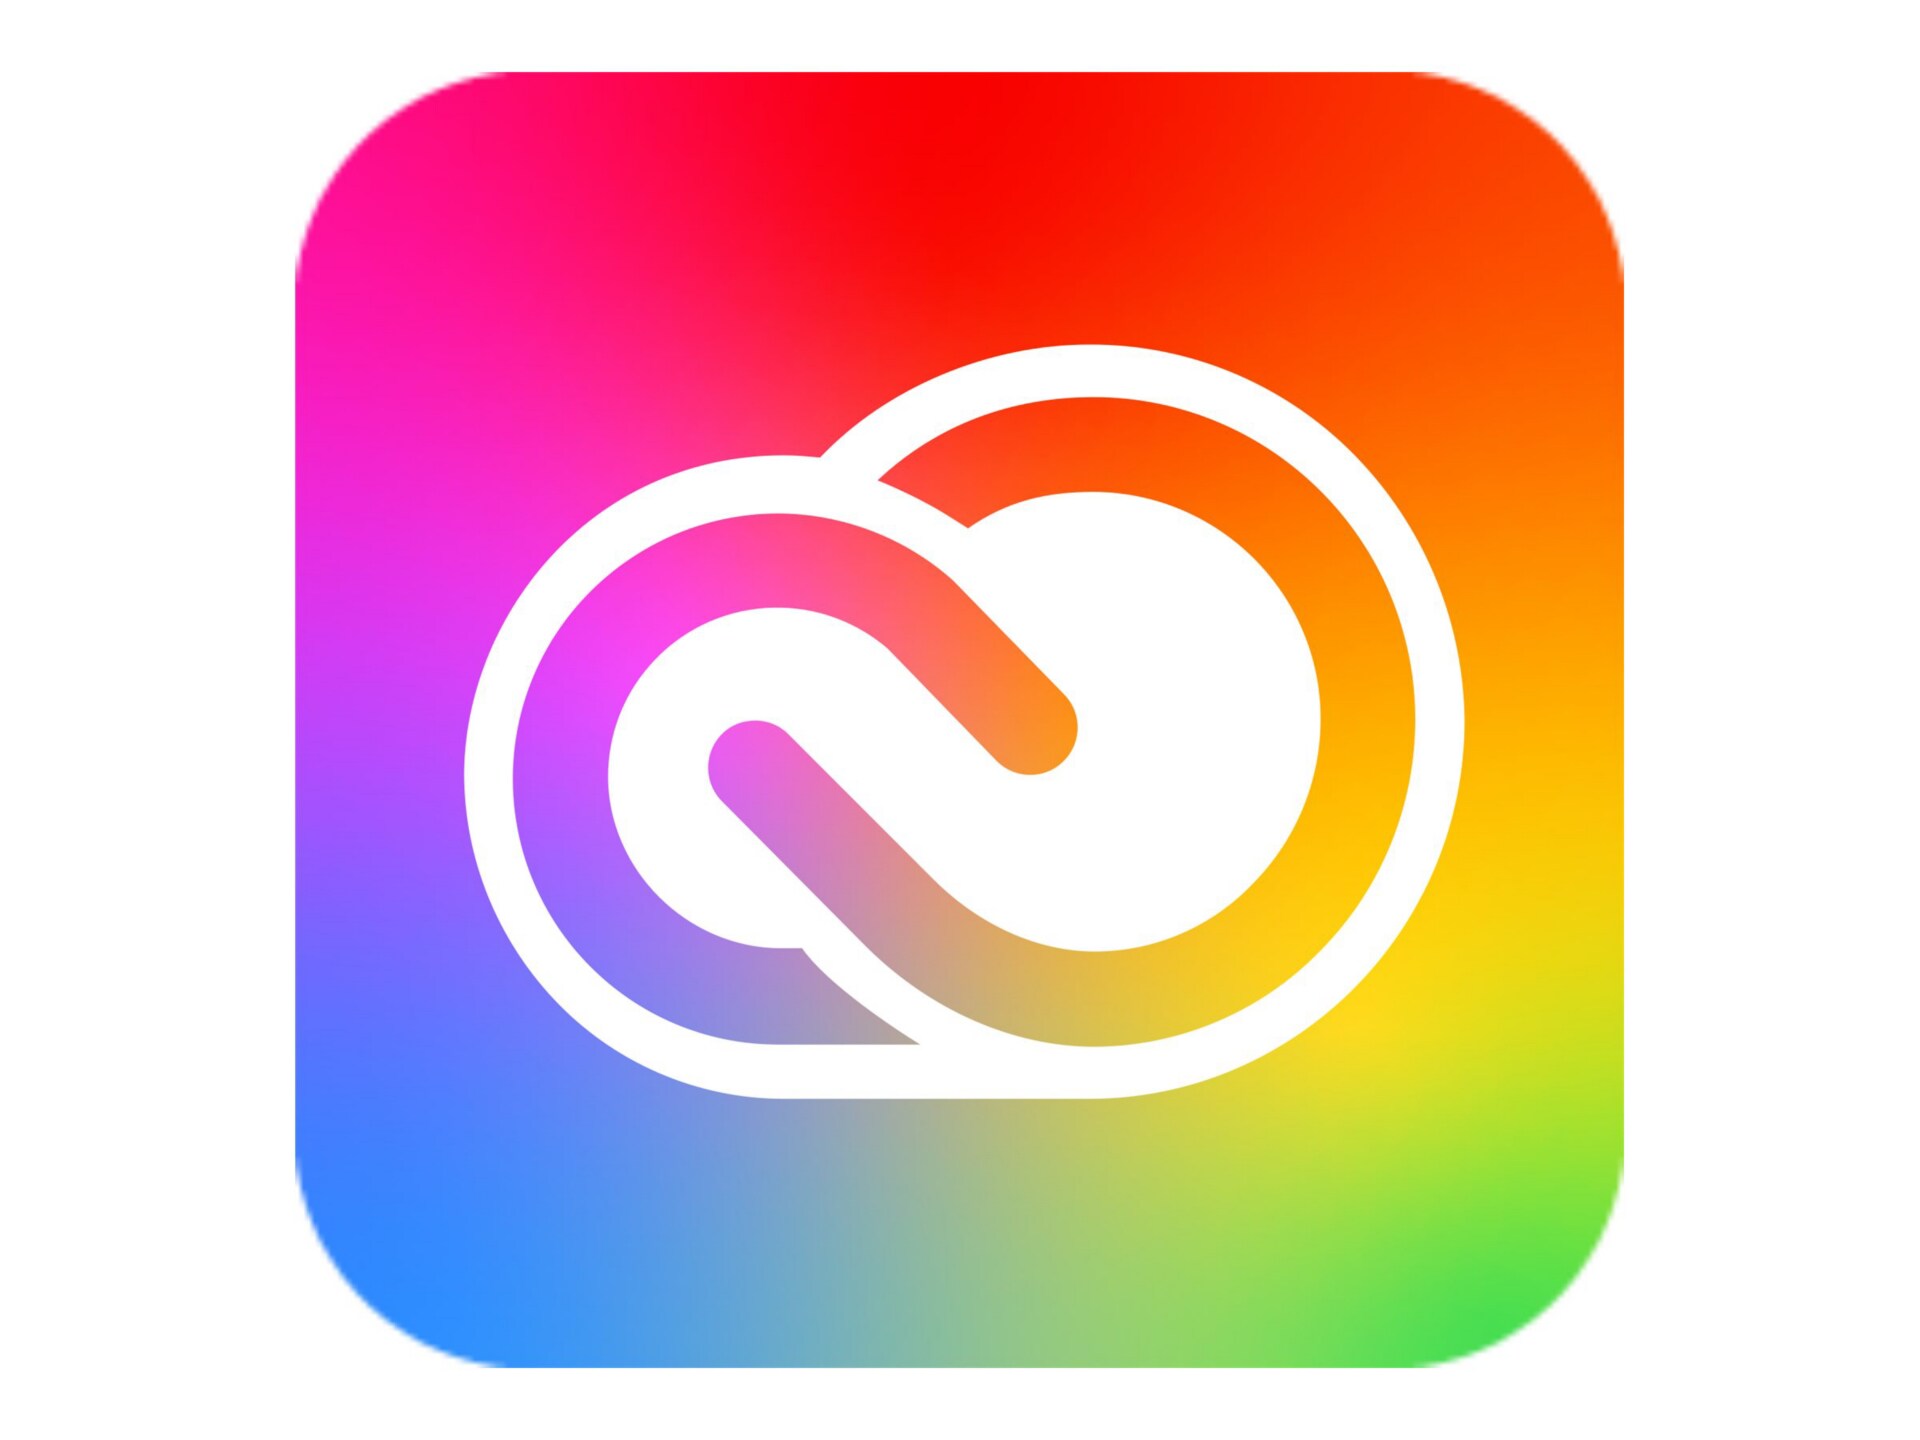 Adobe Creative Cloud for Enterprise - All Apps - Subscription New (2 months) - 1 device